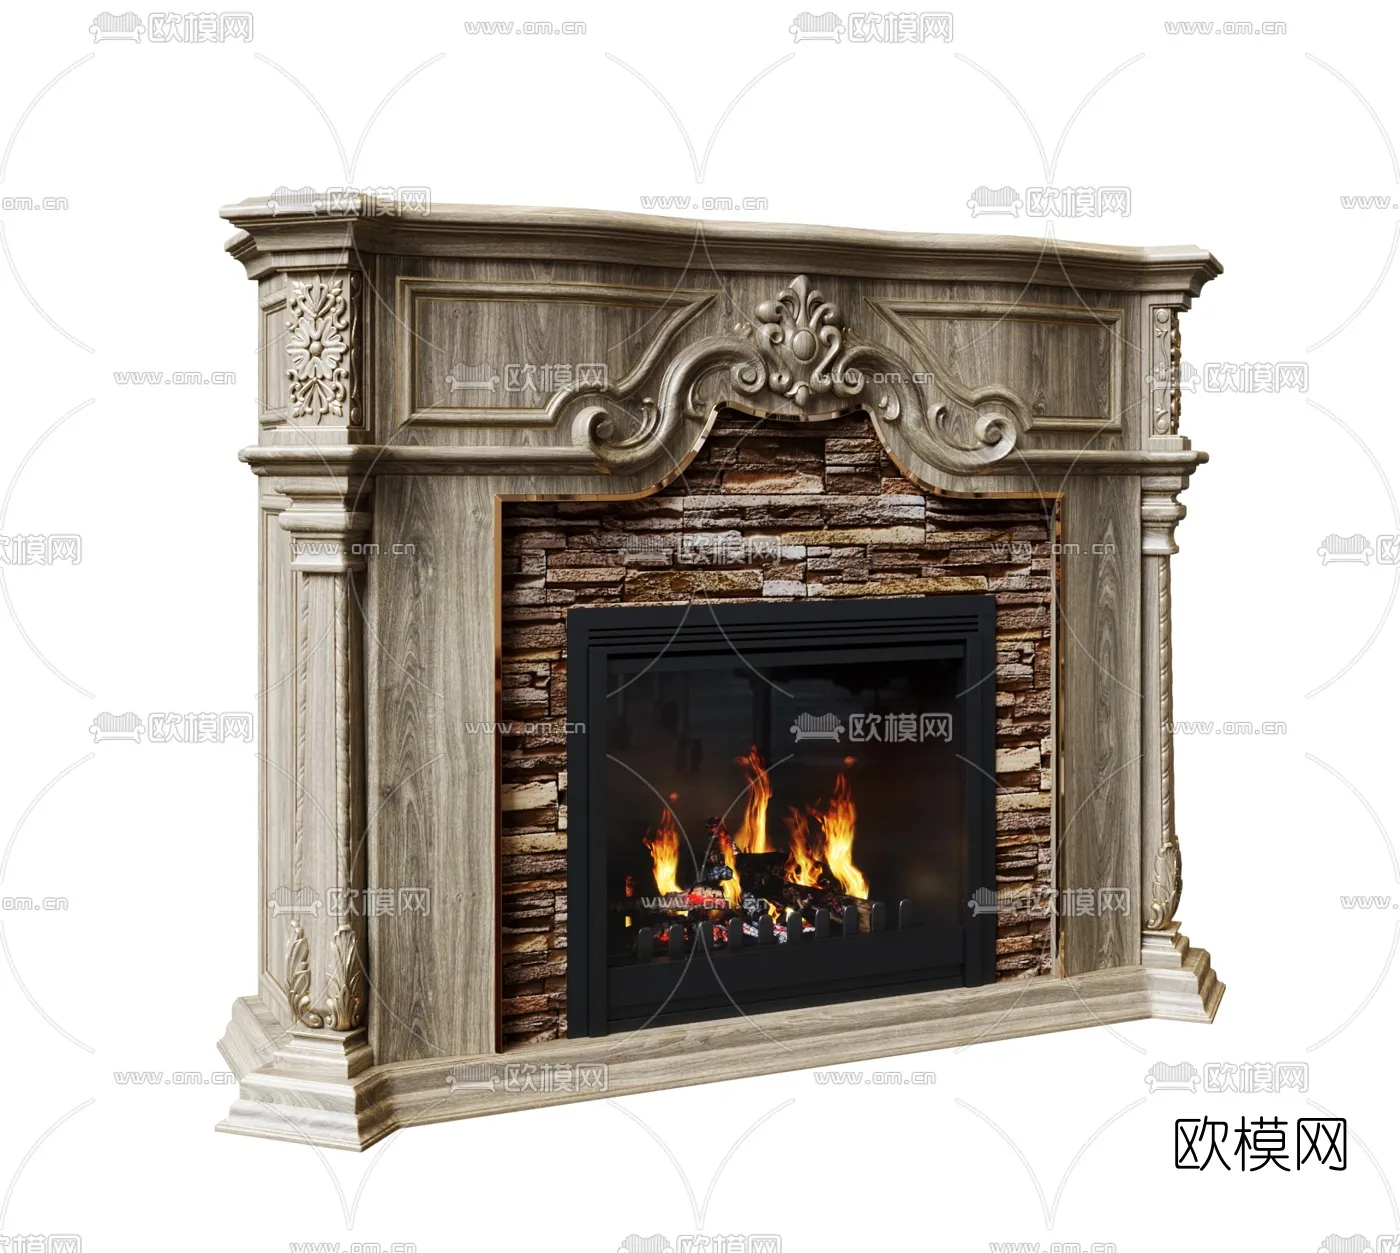 CLASSIC – FIREPLACE 3DMODELS – 013